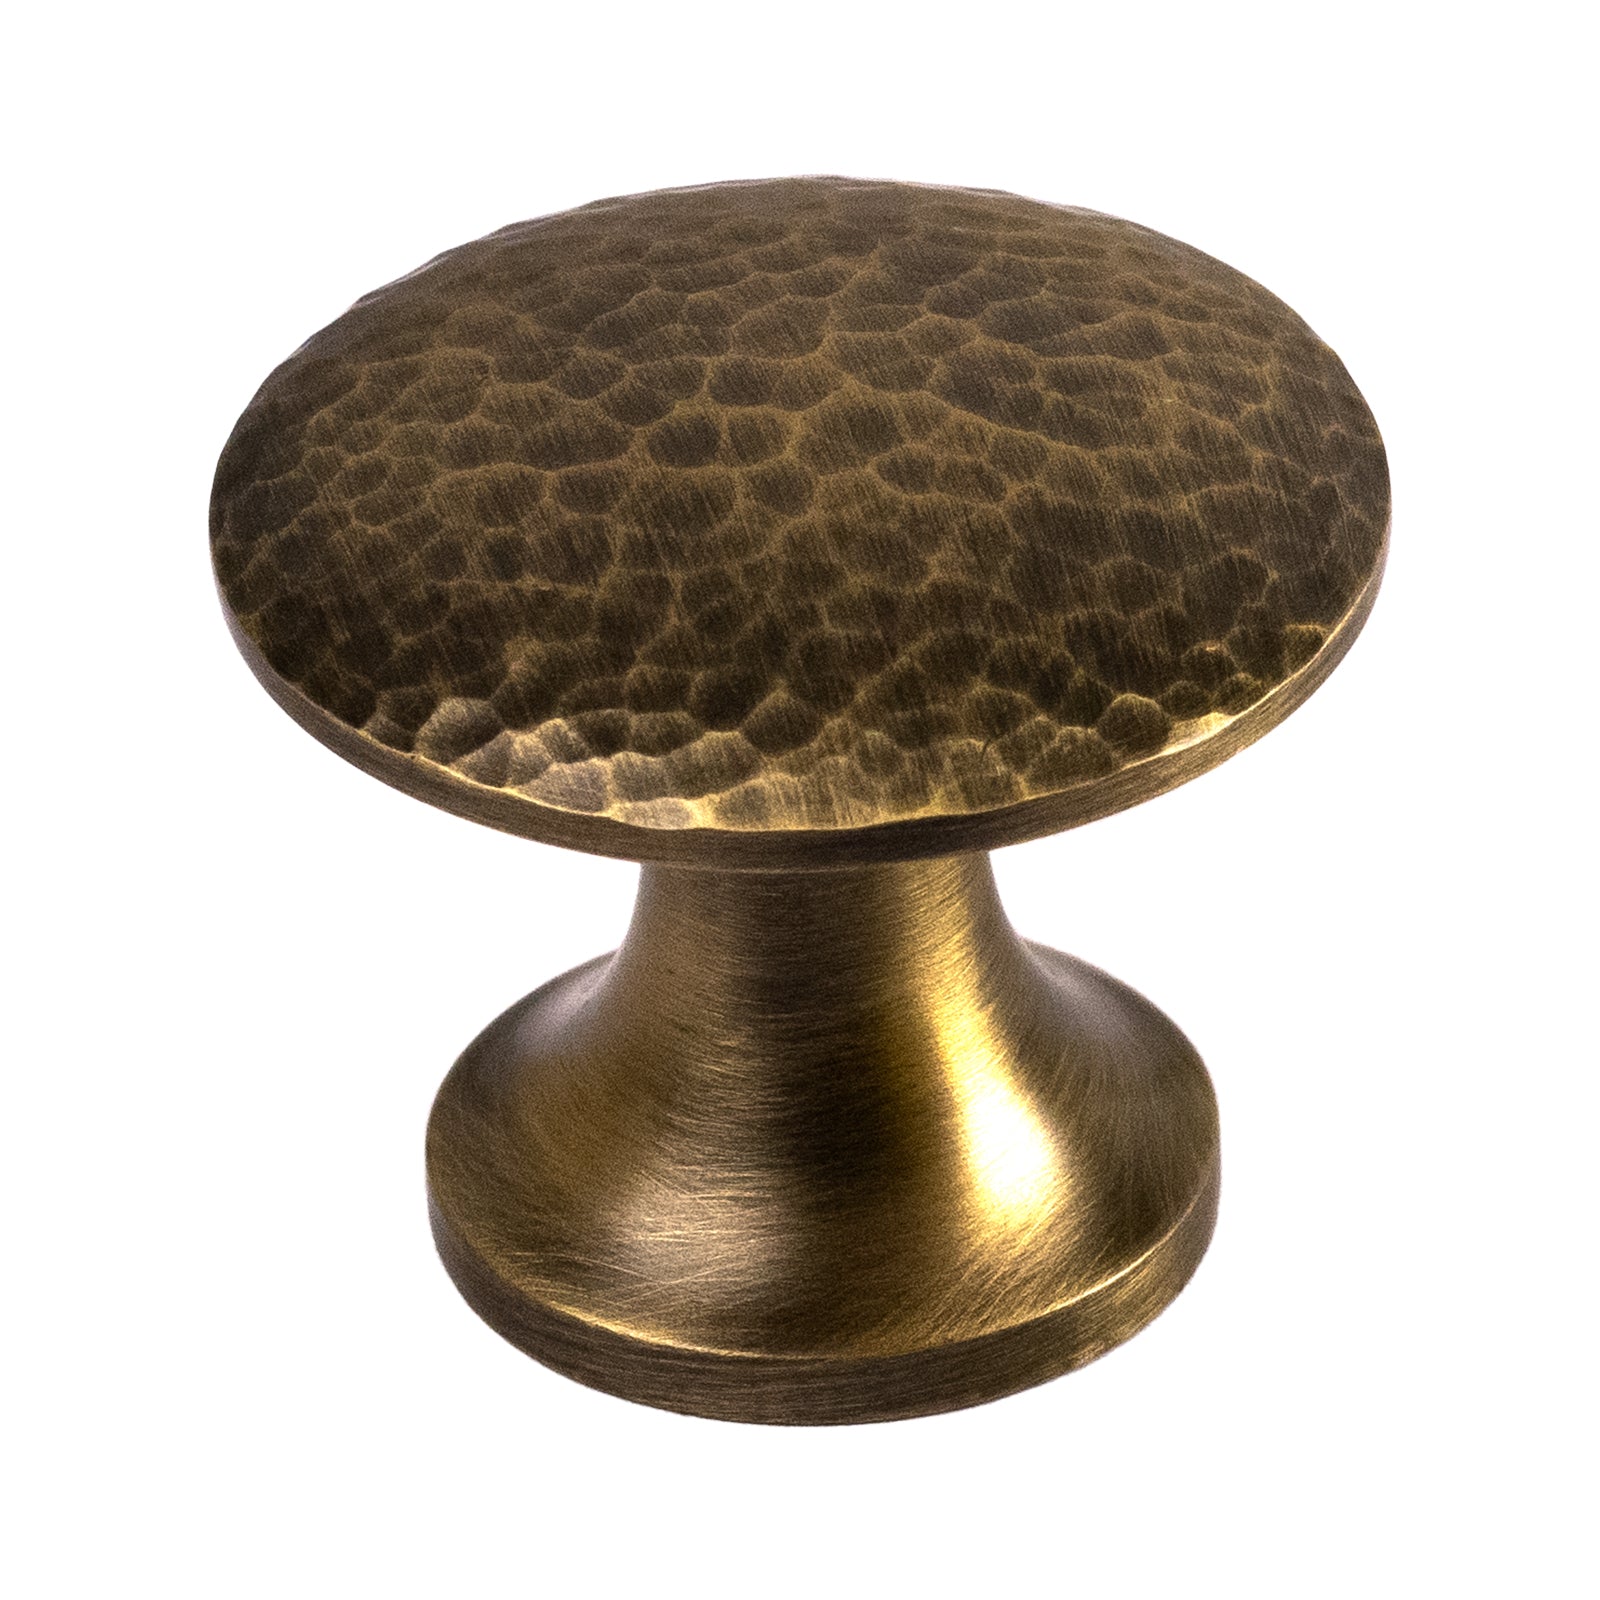 Hammered Classic Cabinet Knobs in Antique Brass 37mmSHOW